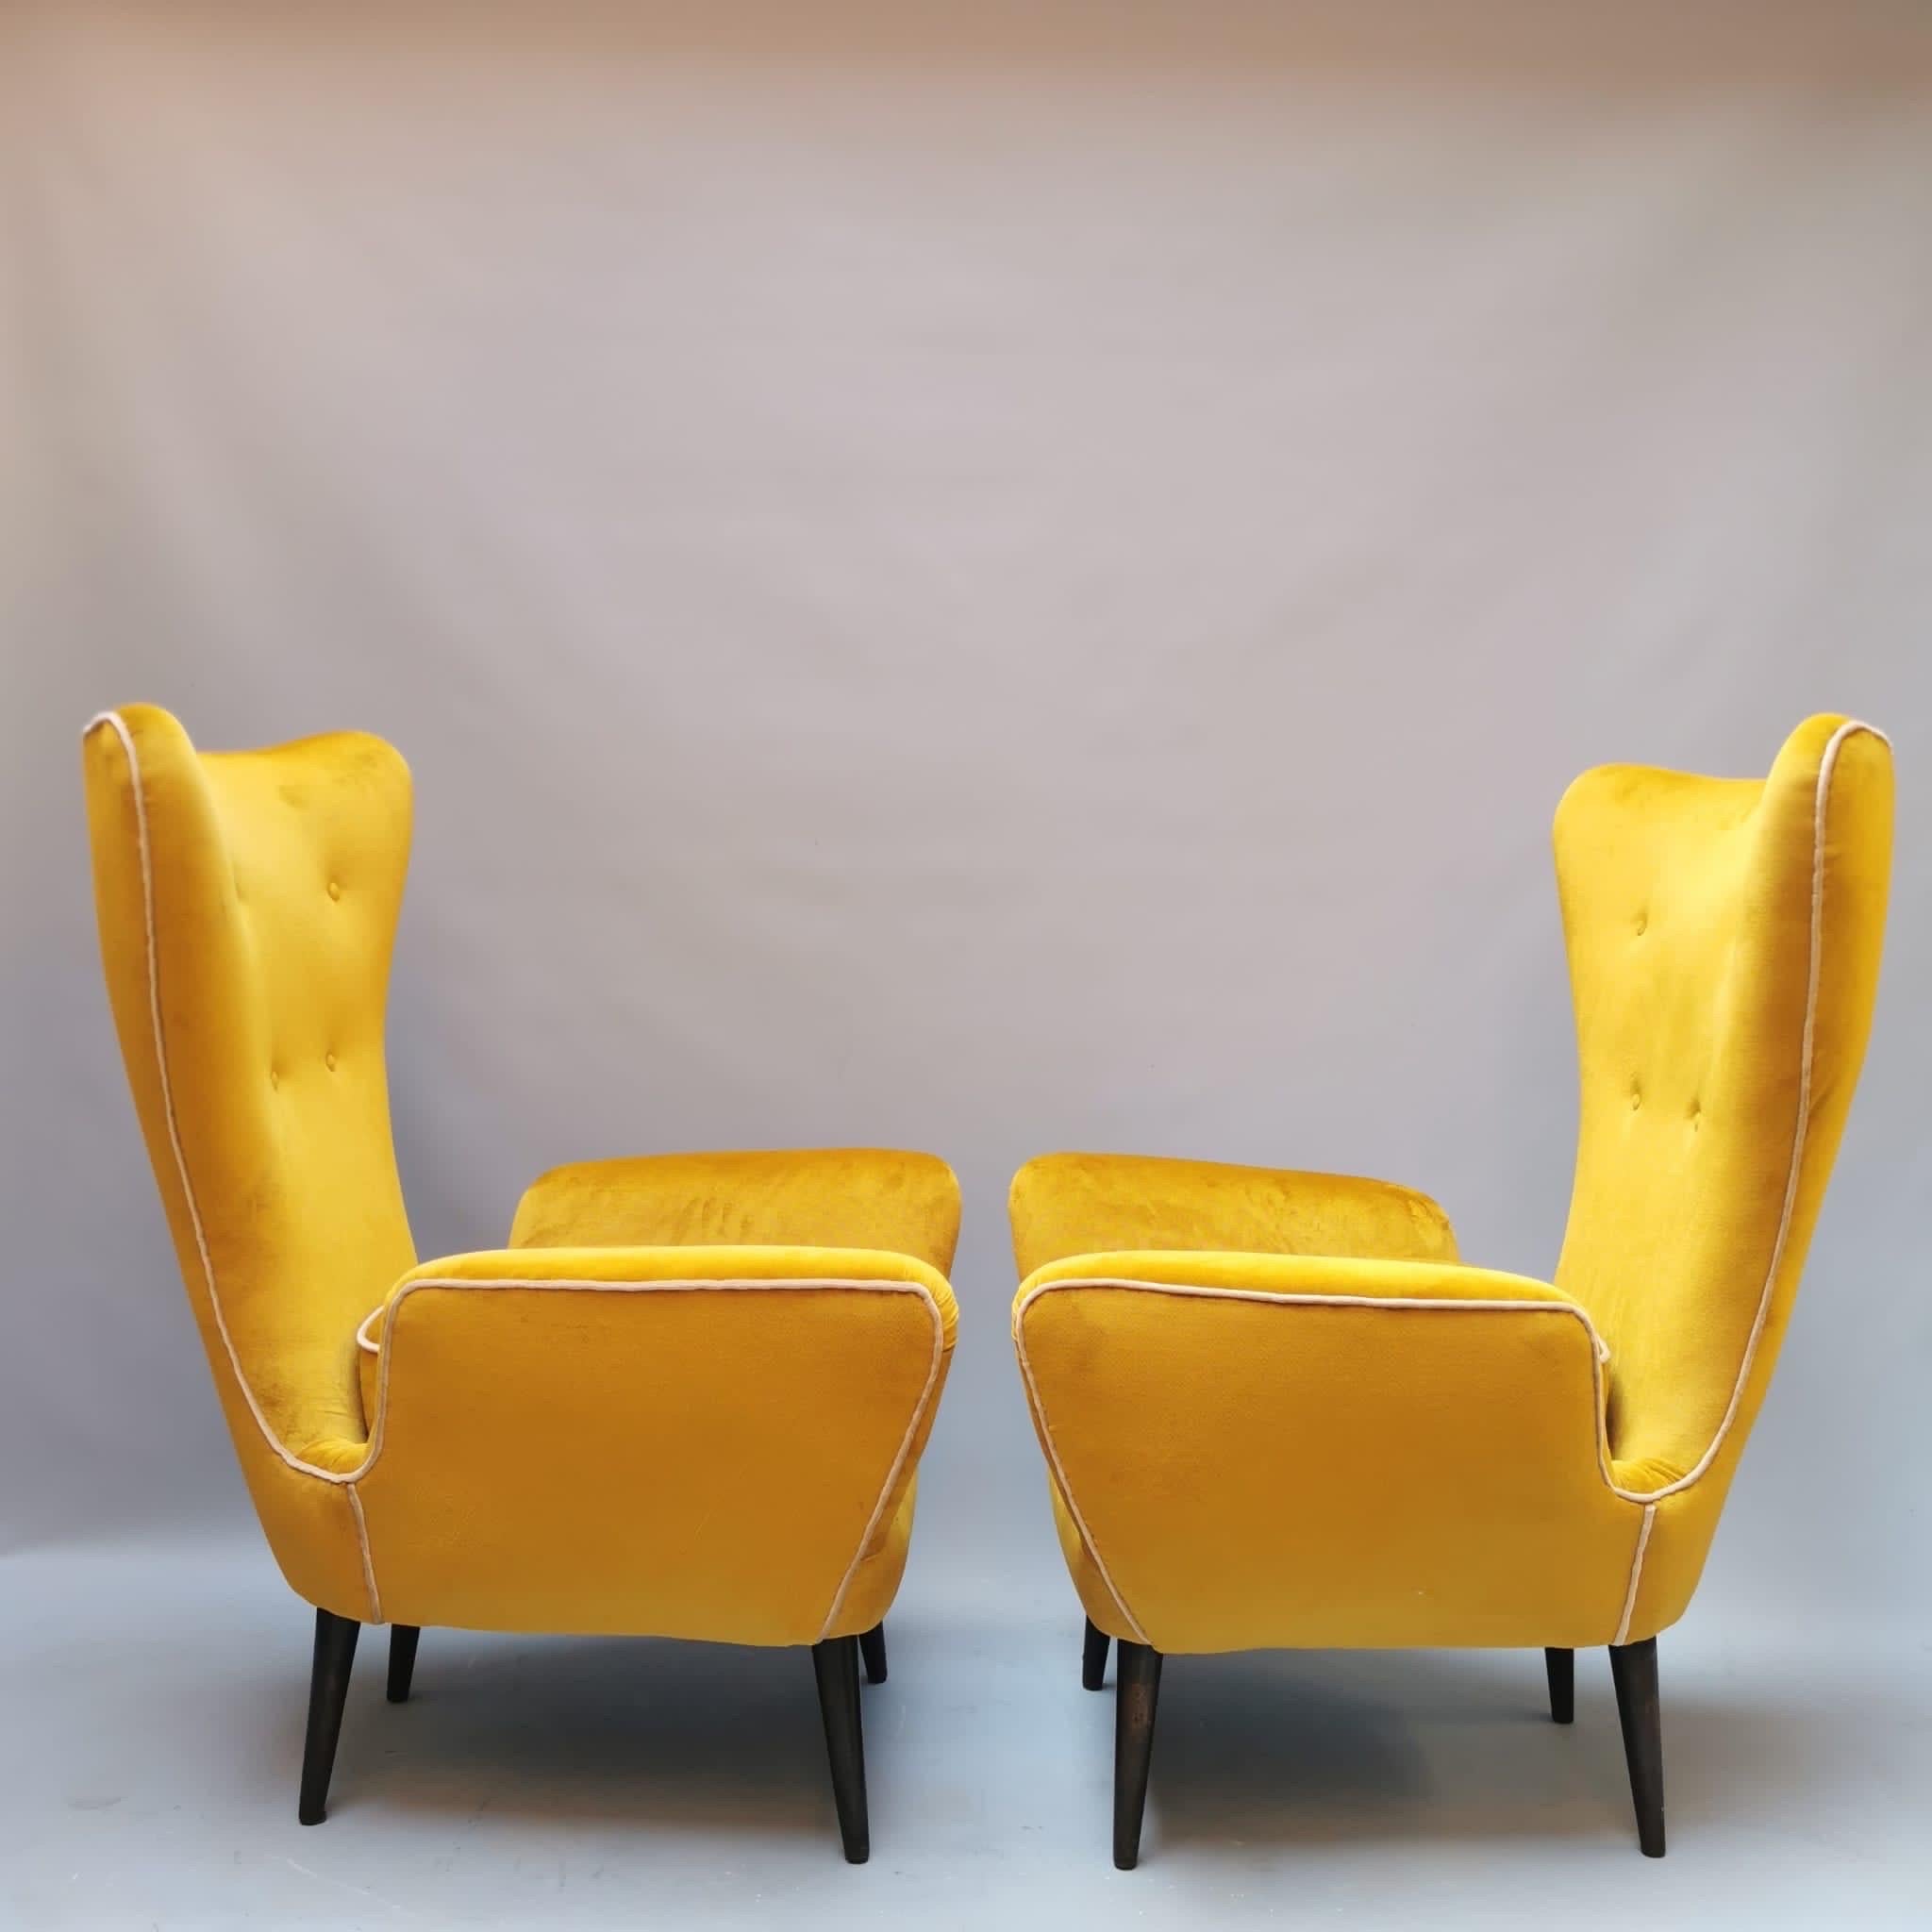 The pair of armchairs is a design by Emilio Sala and Giorgio Maldini for Fratelli Galimberti. The armchairs have been restored and reupholstered by our Italian craftsmen, using quality materials.